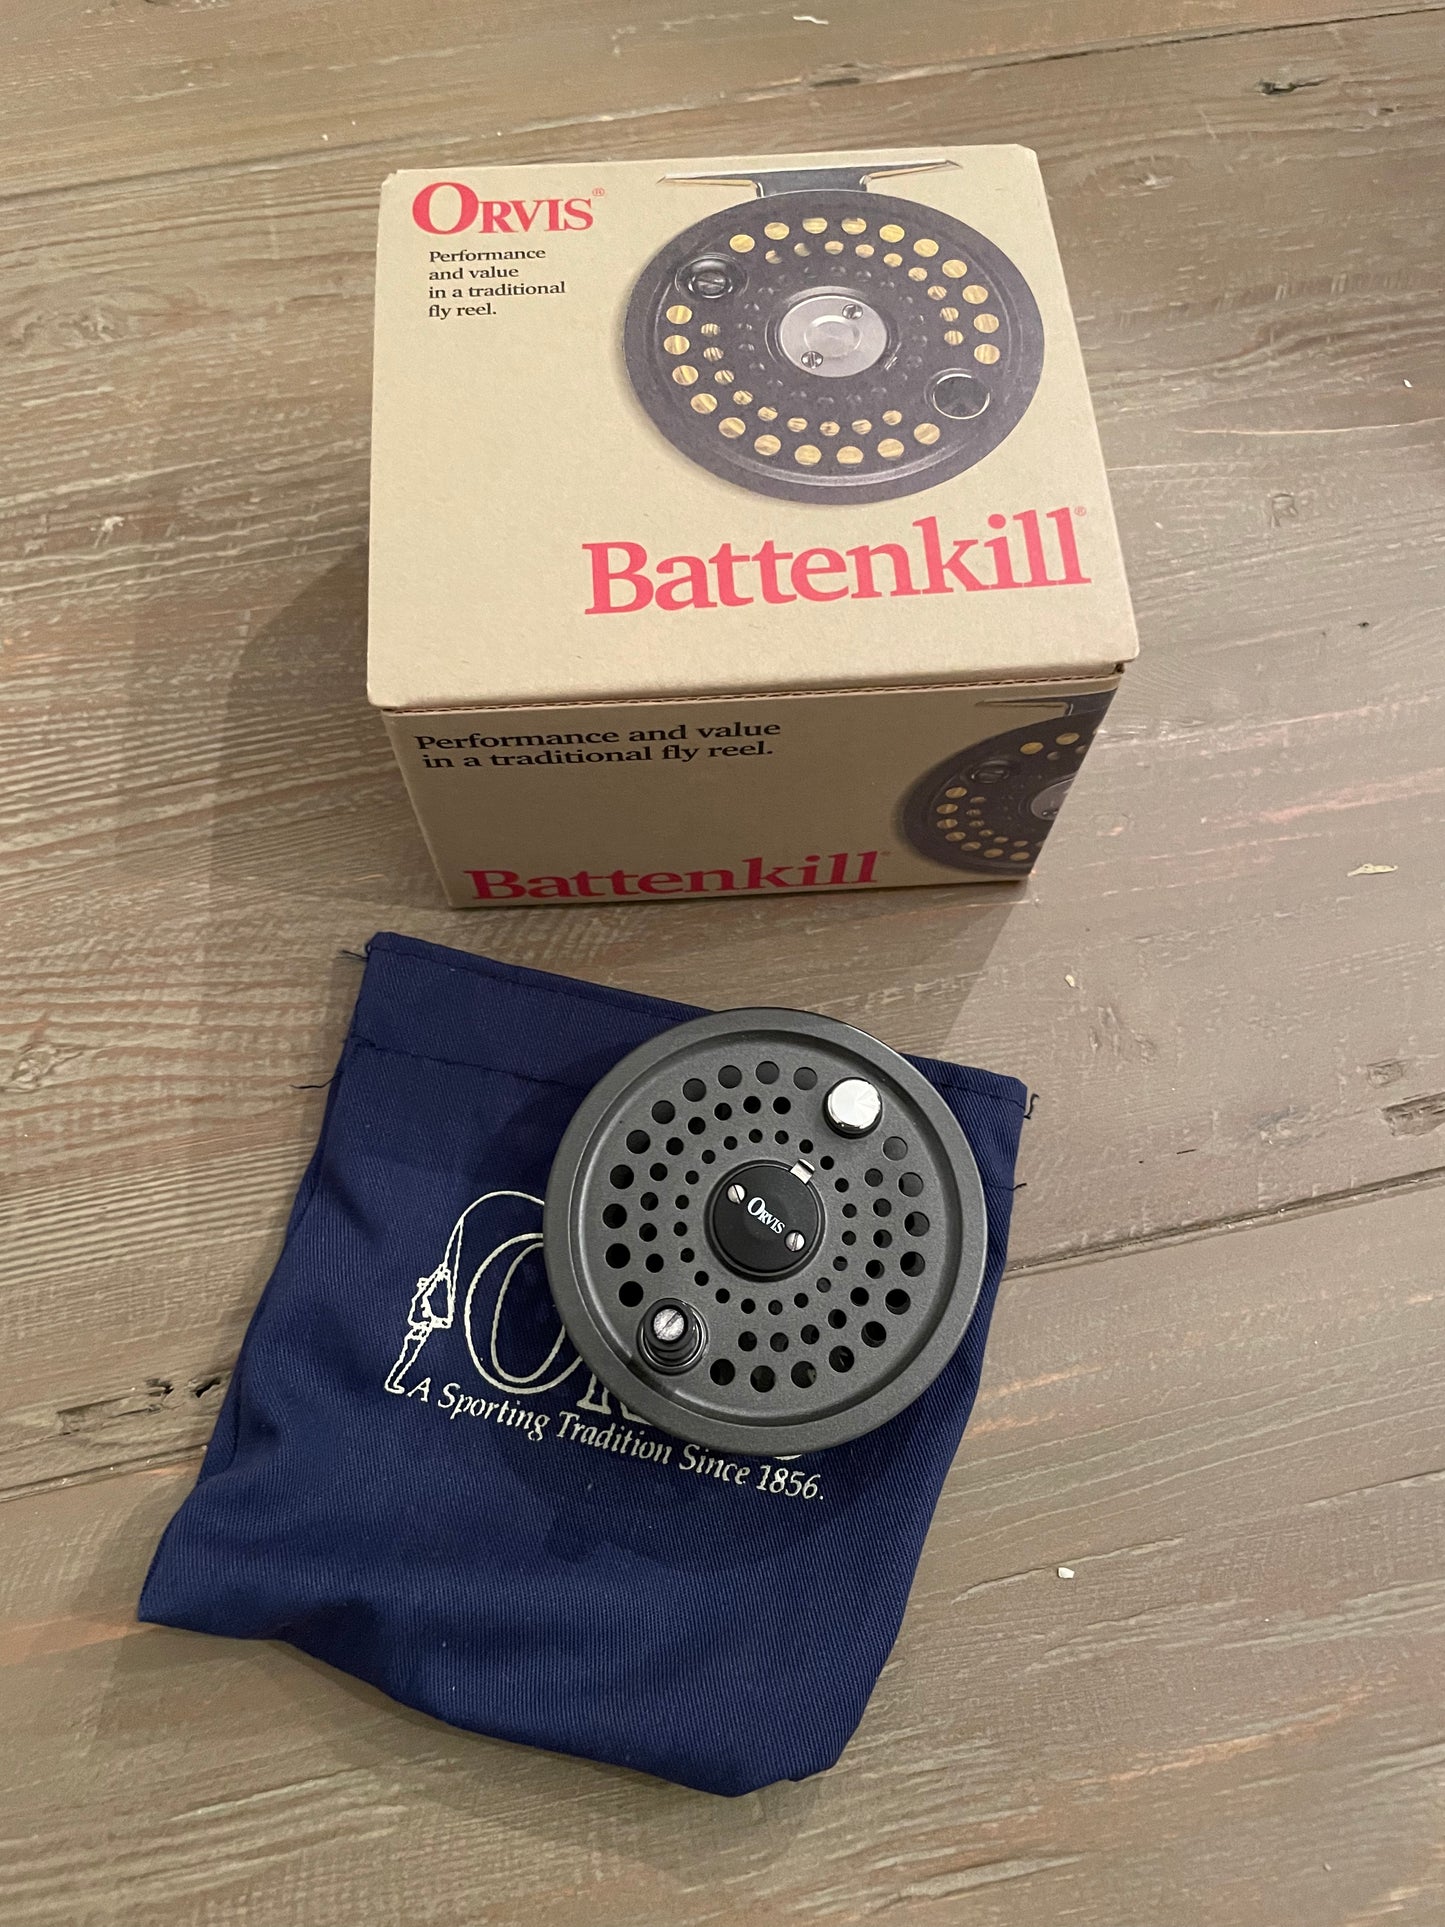 Orvis Battenkill Fly Reel Extra spool with box